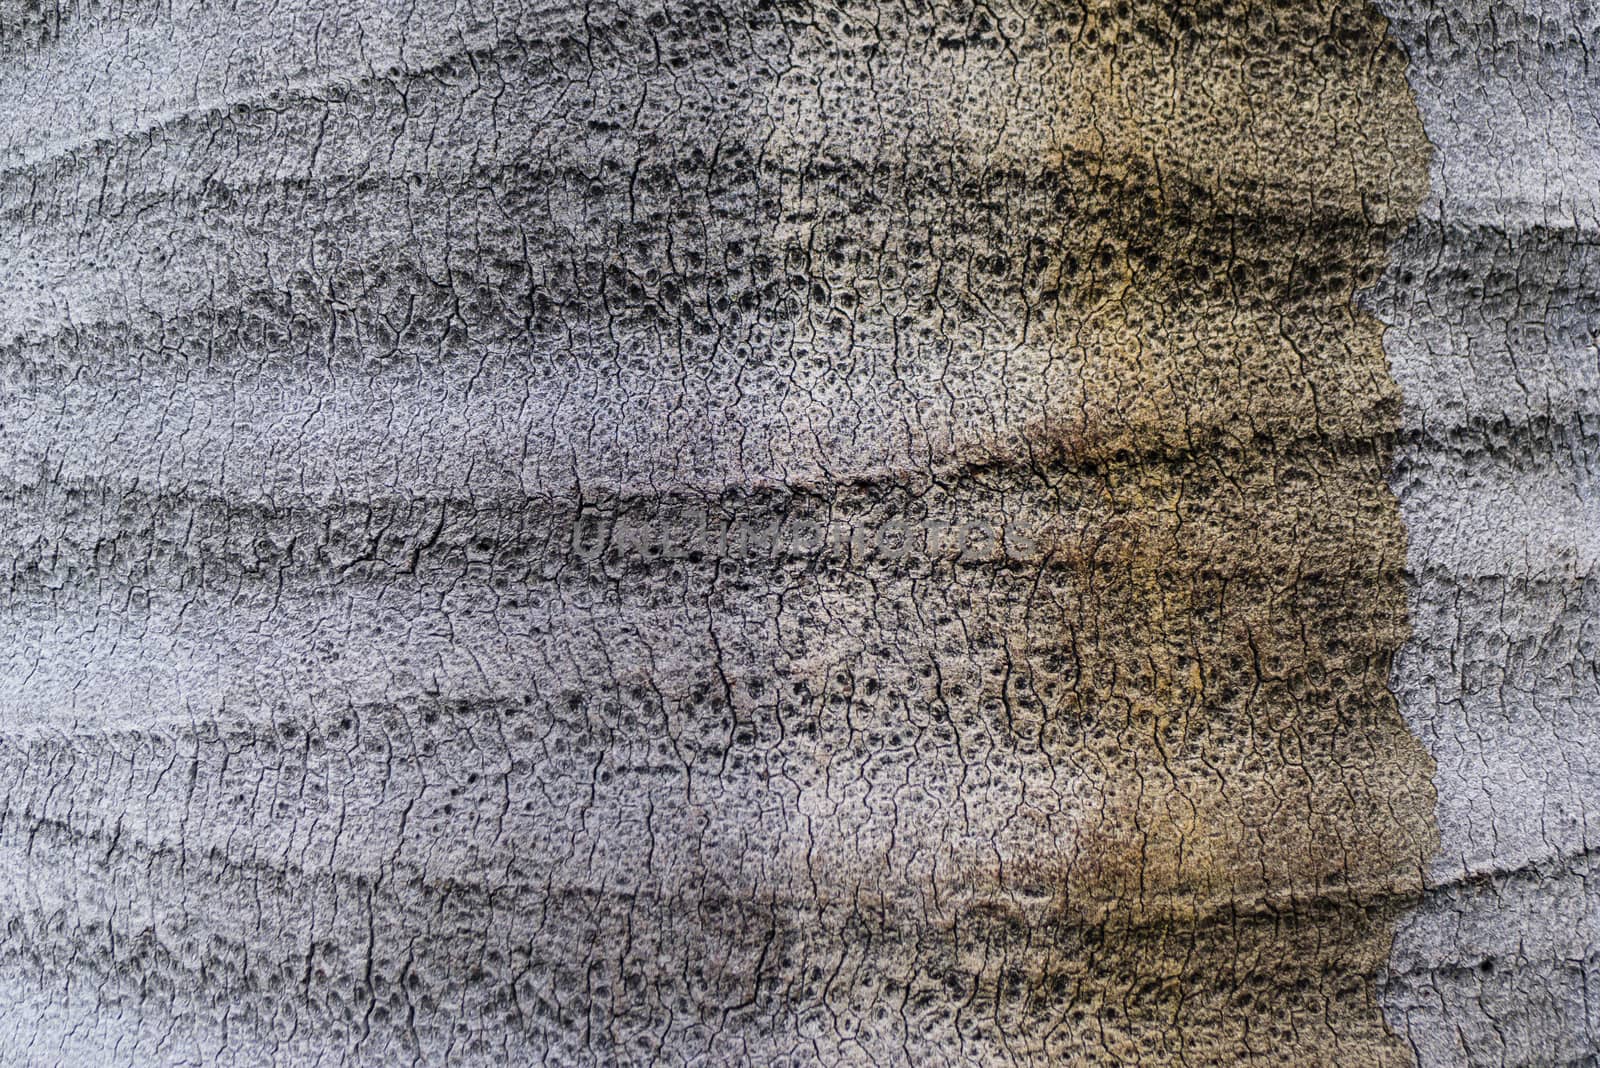 Tree Trunk detail of Jubaea chilensis, Chilean wine palm, Chile cocopalm.